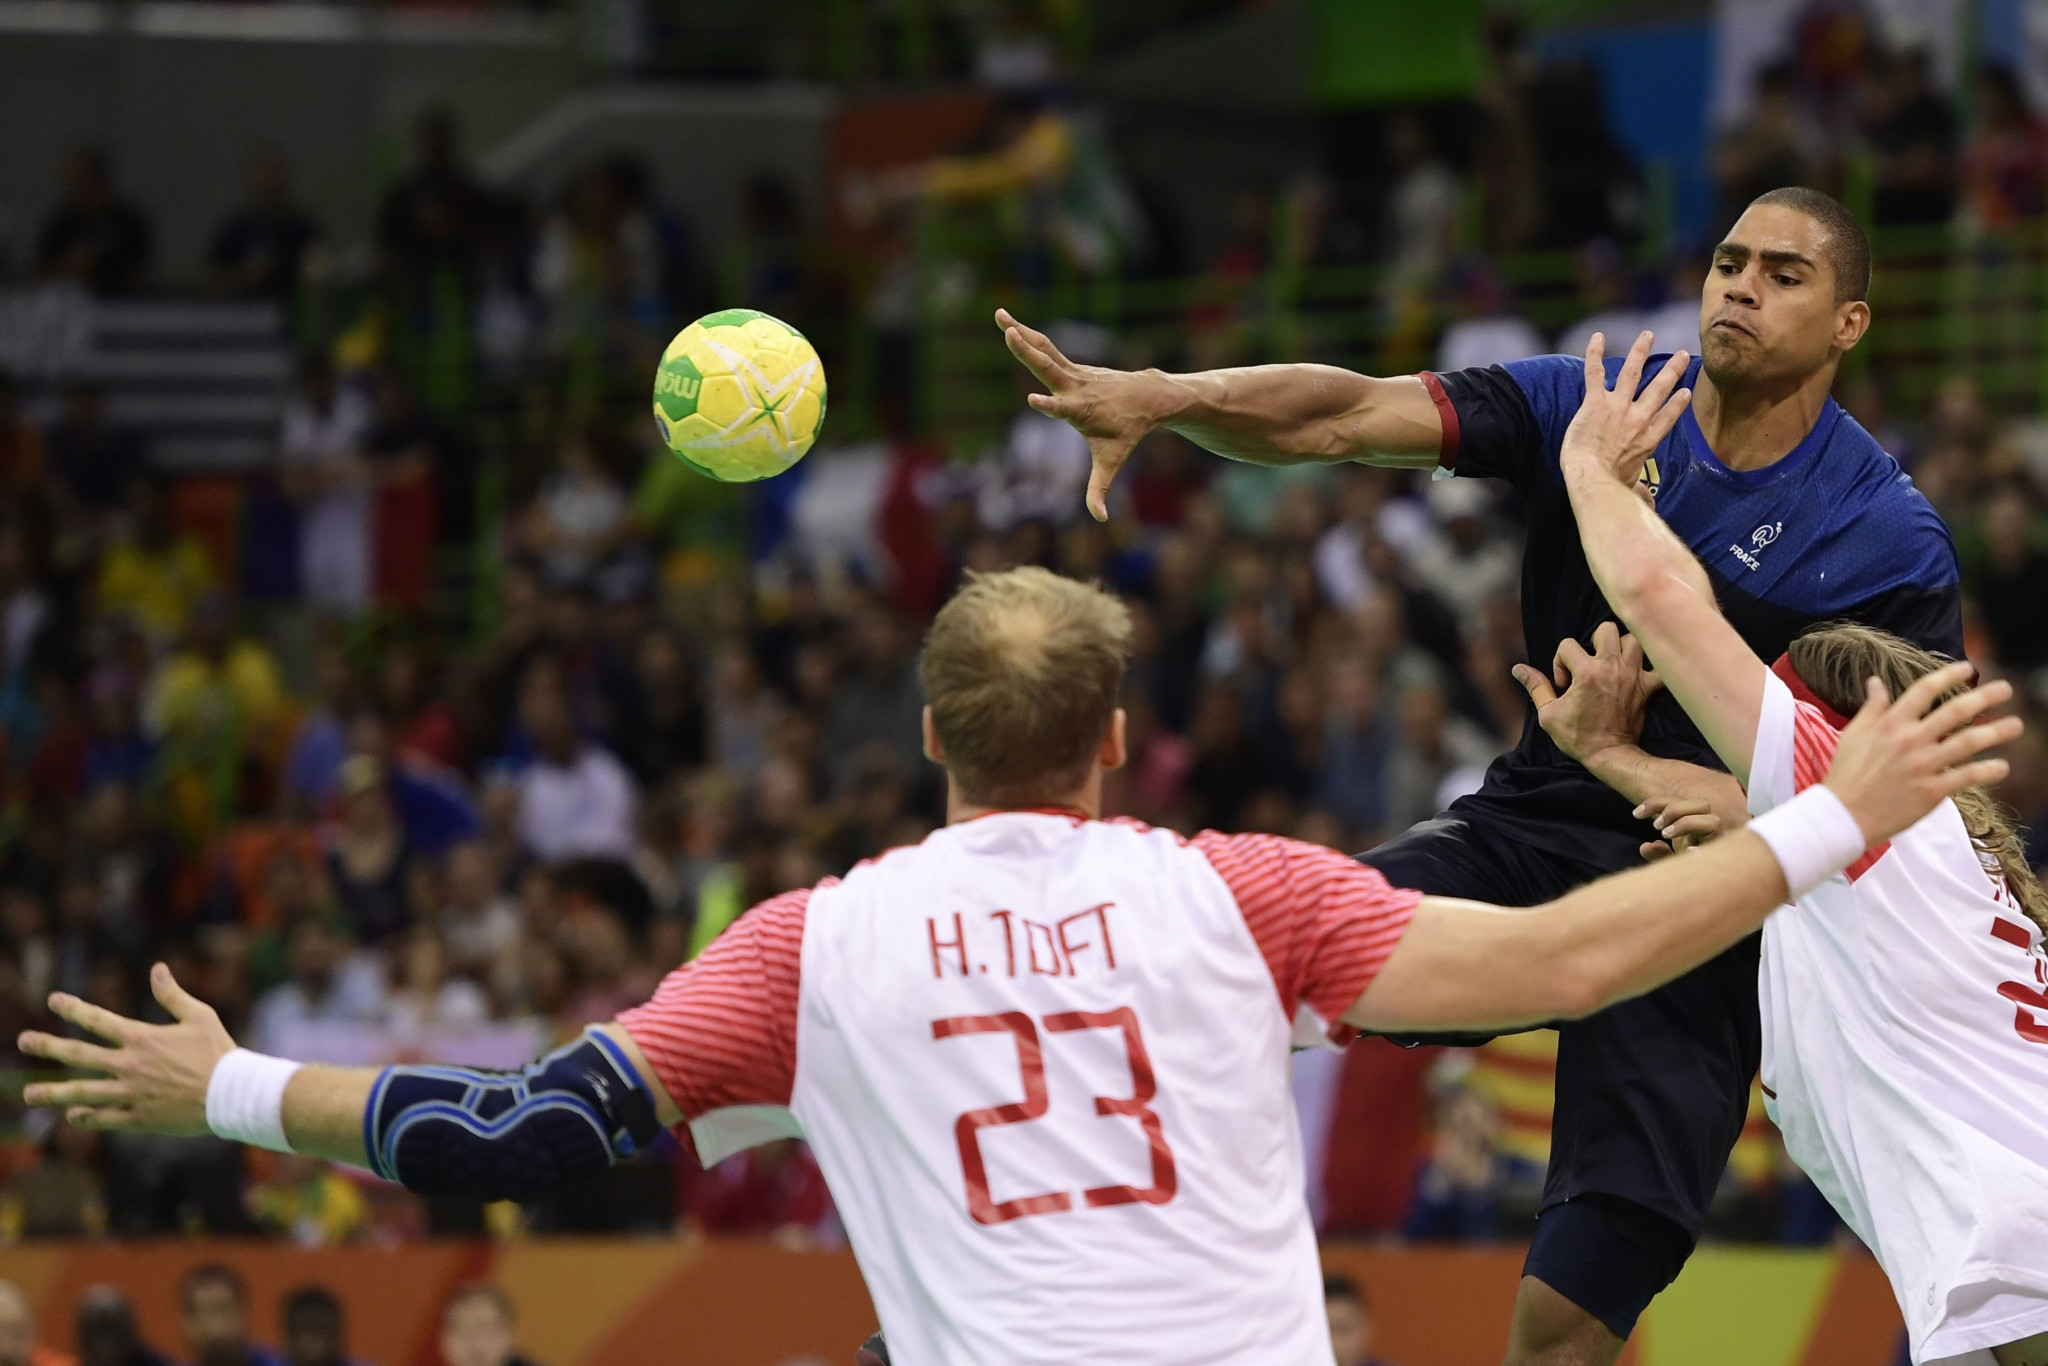 Reports on changes to the rules and regulations of handball will be given at the IHF Congress ©Getty Images